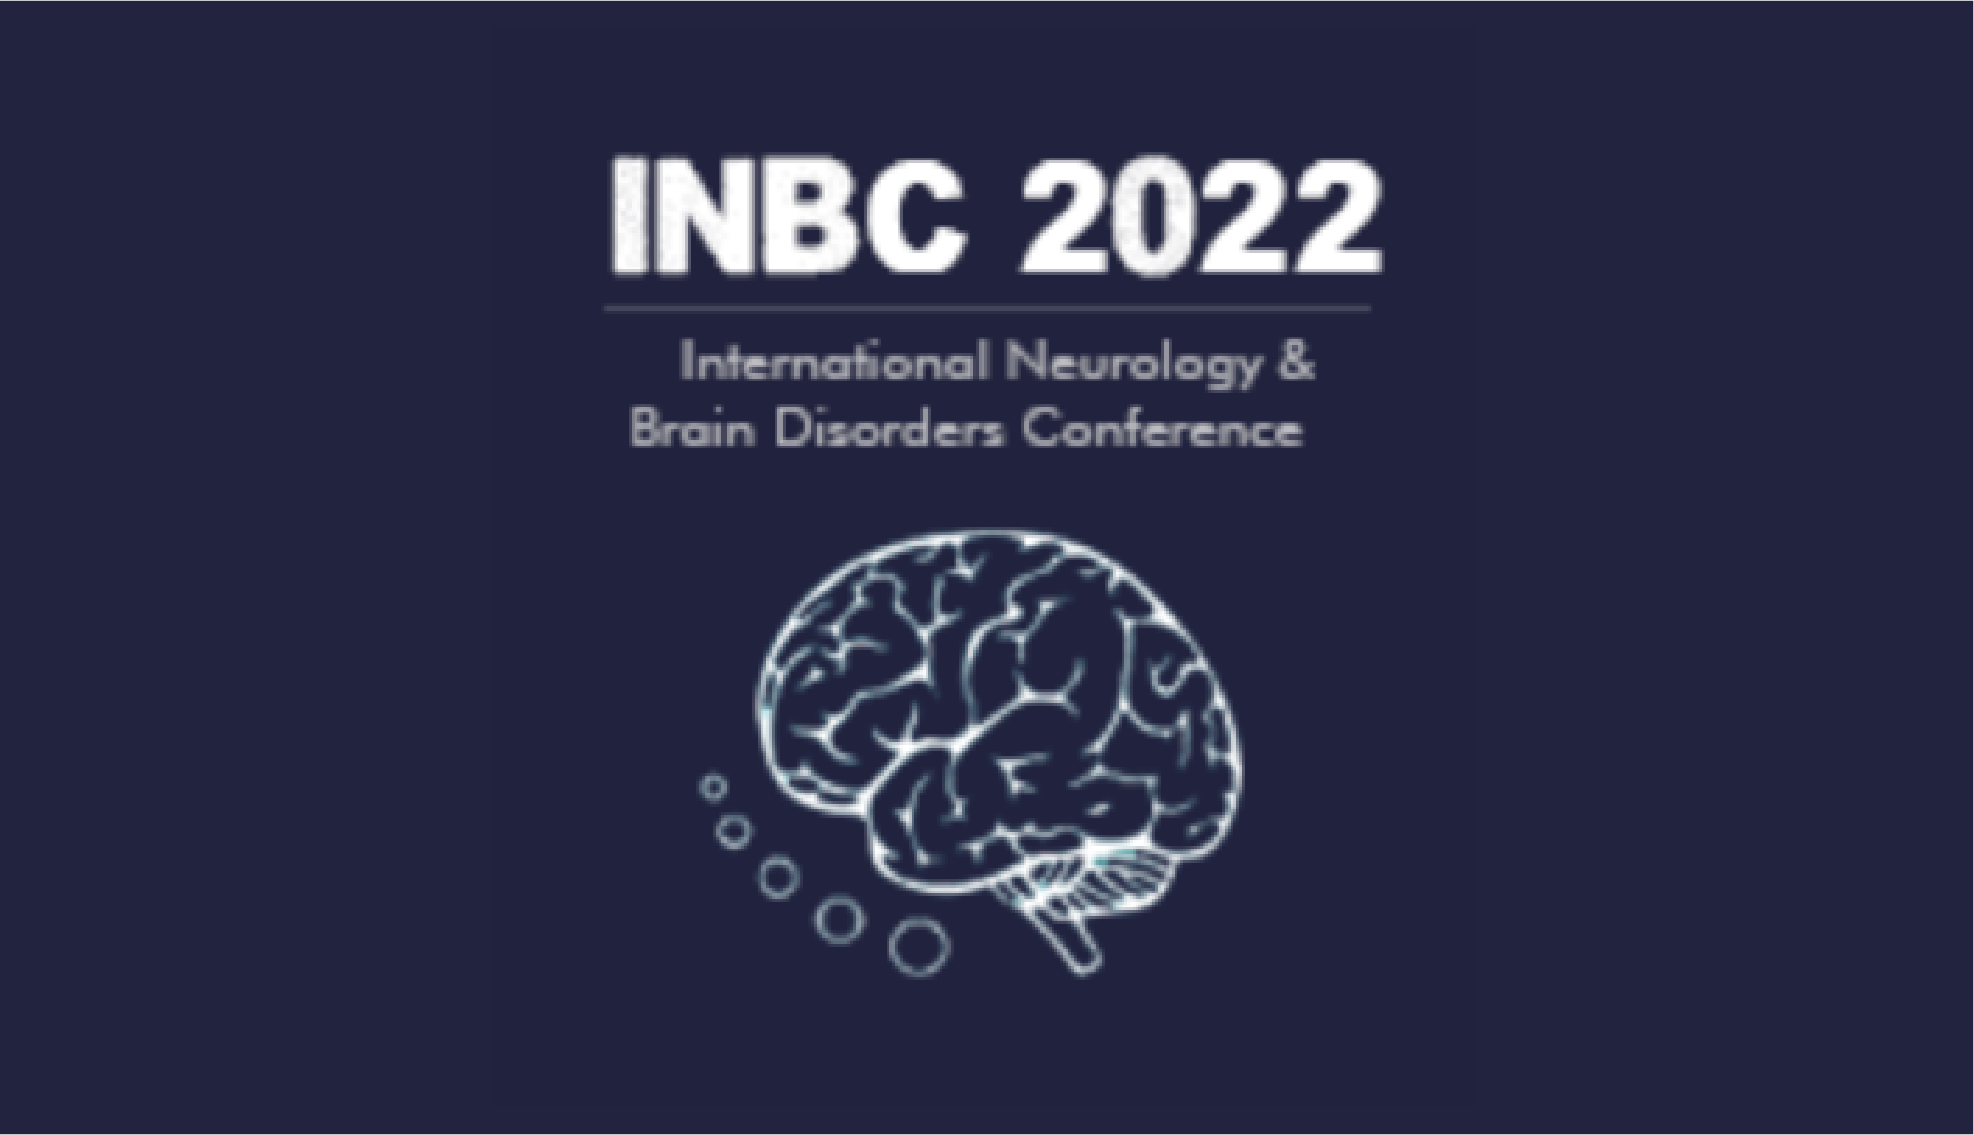 6th Edition of International Conference on Neurology and Brain Disorders (INBC 2022)